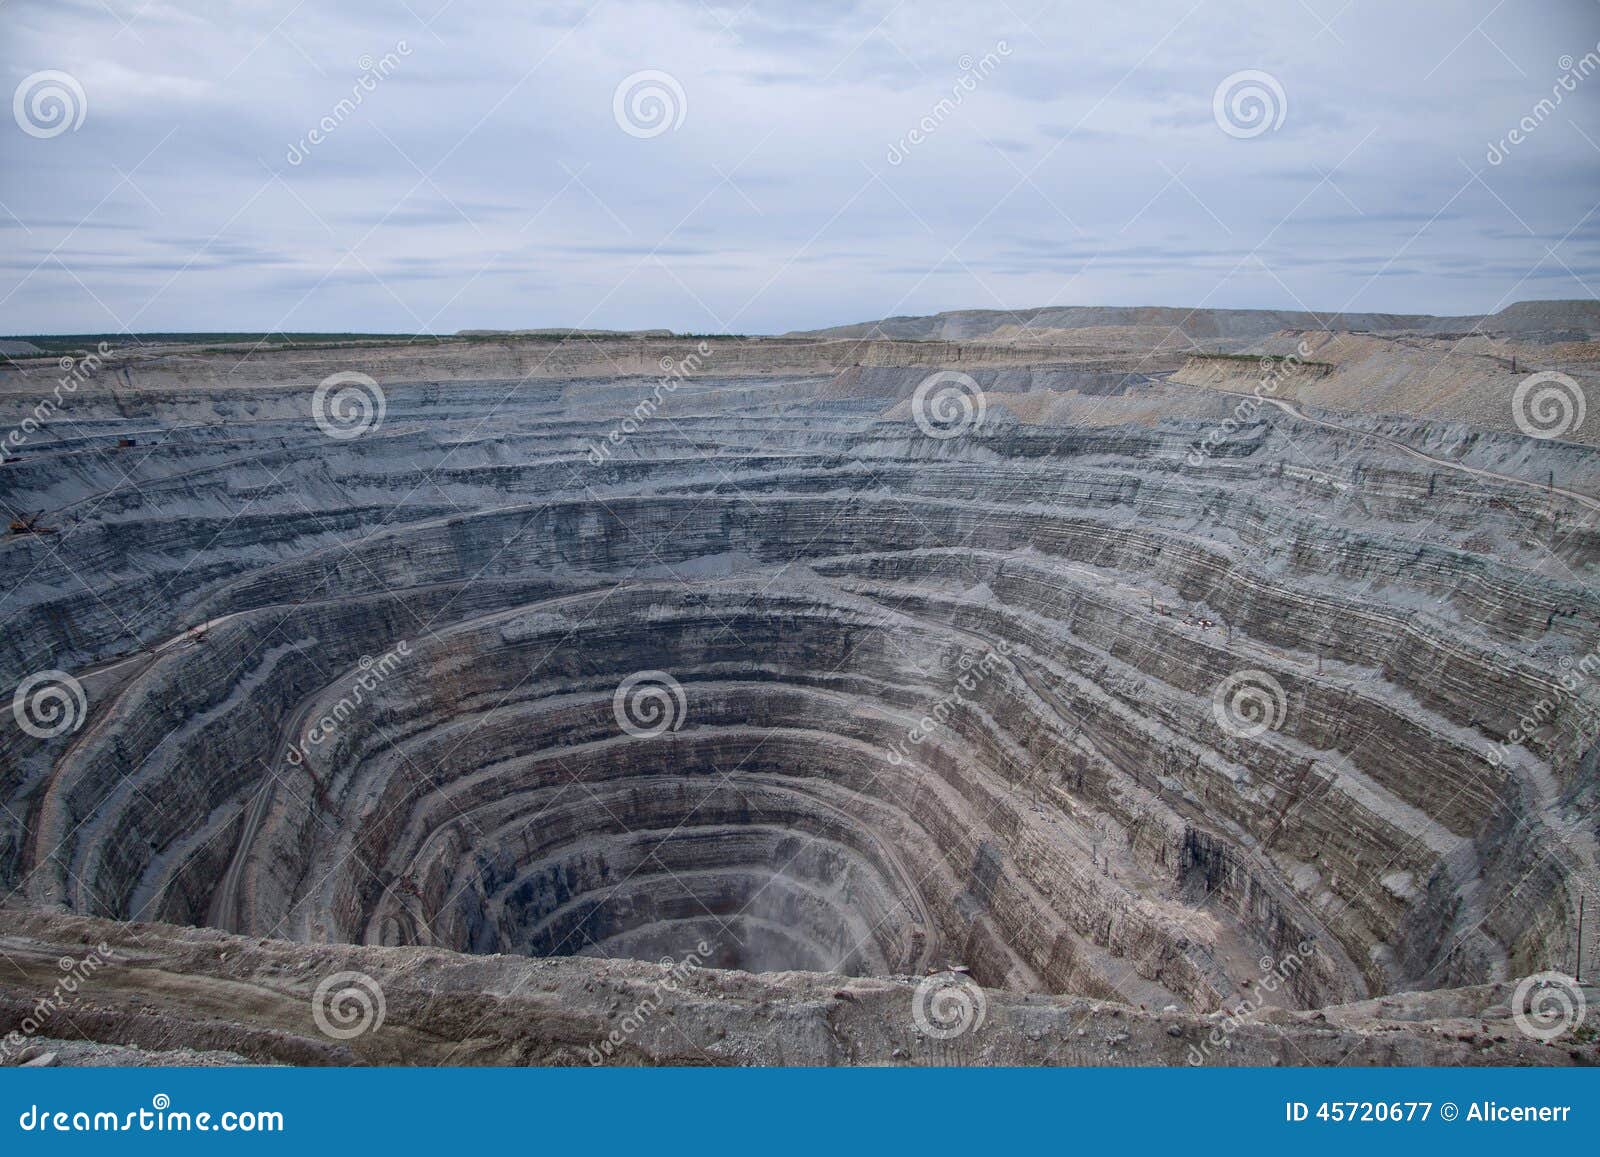 South Africa: an open works mine at De Beers diamond mine free public  domain image